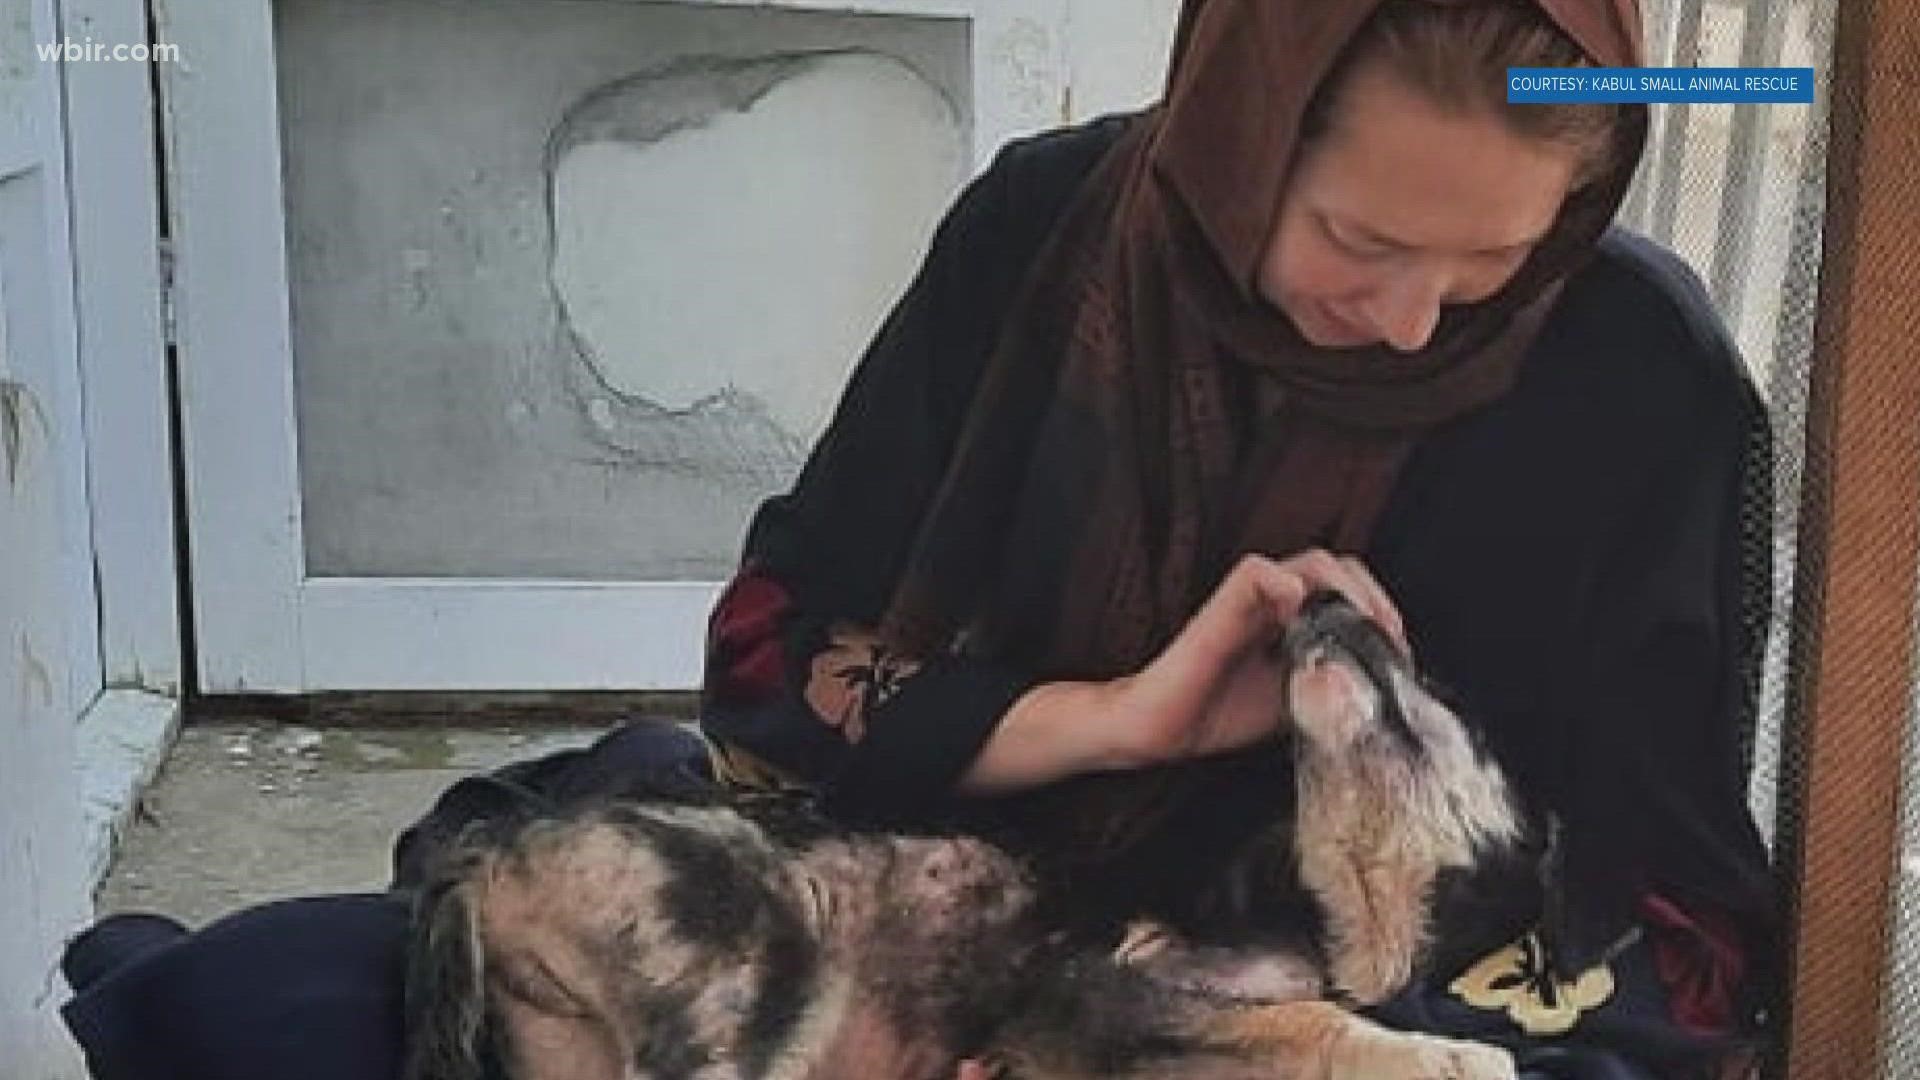 An East Tennessee woman stayed in Afghanistan to care for animals 